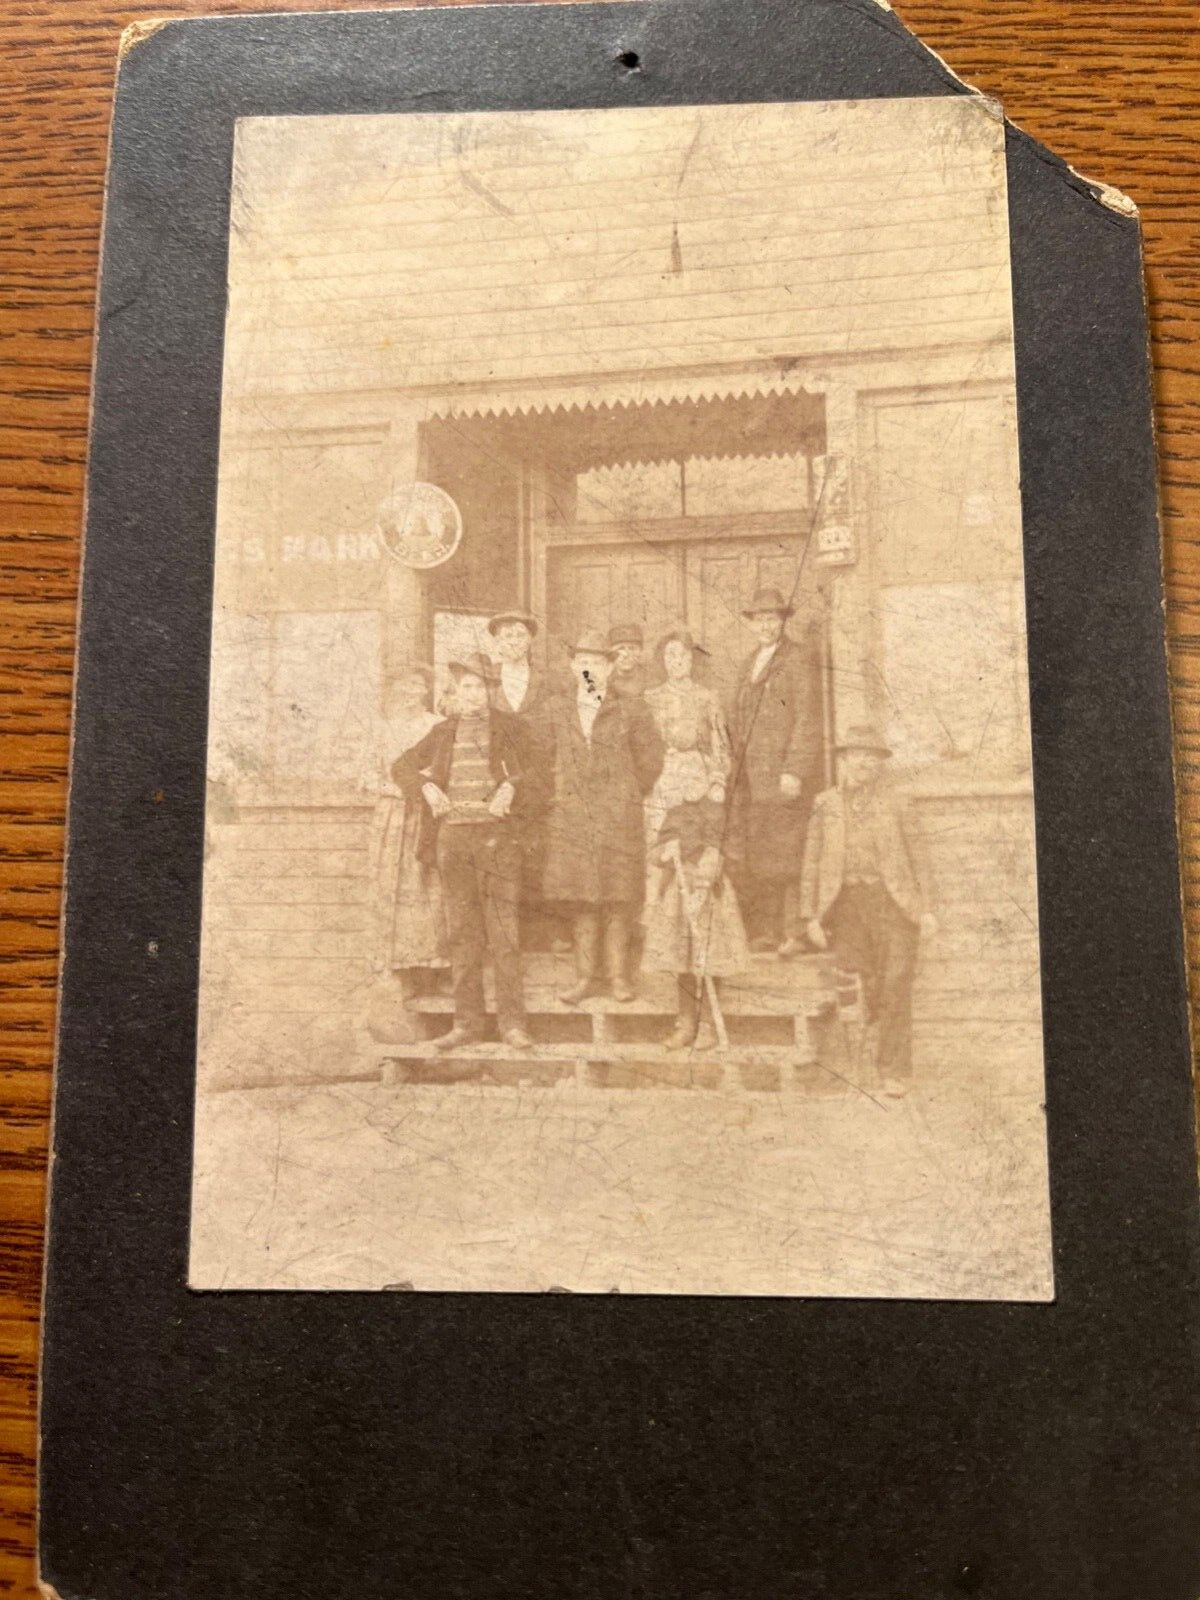 EARLY STOREFRONT Photo ~ c.- 1885  - Beer Sign